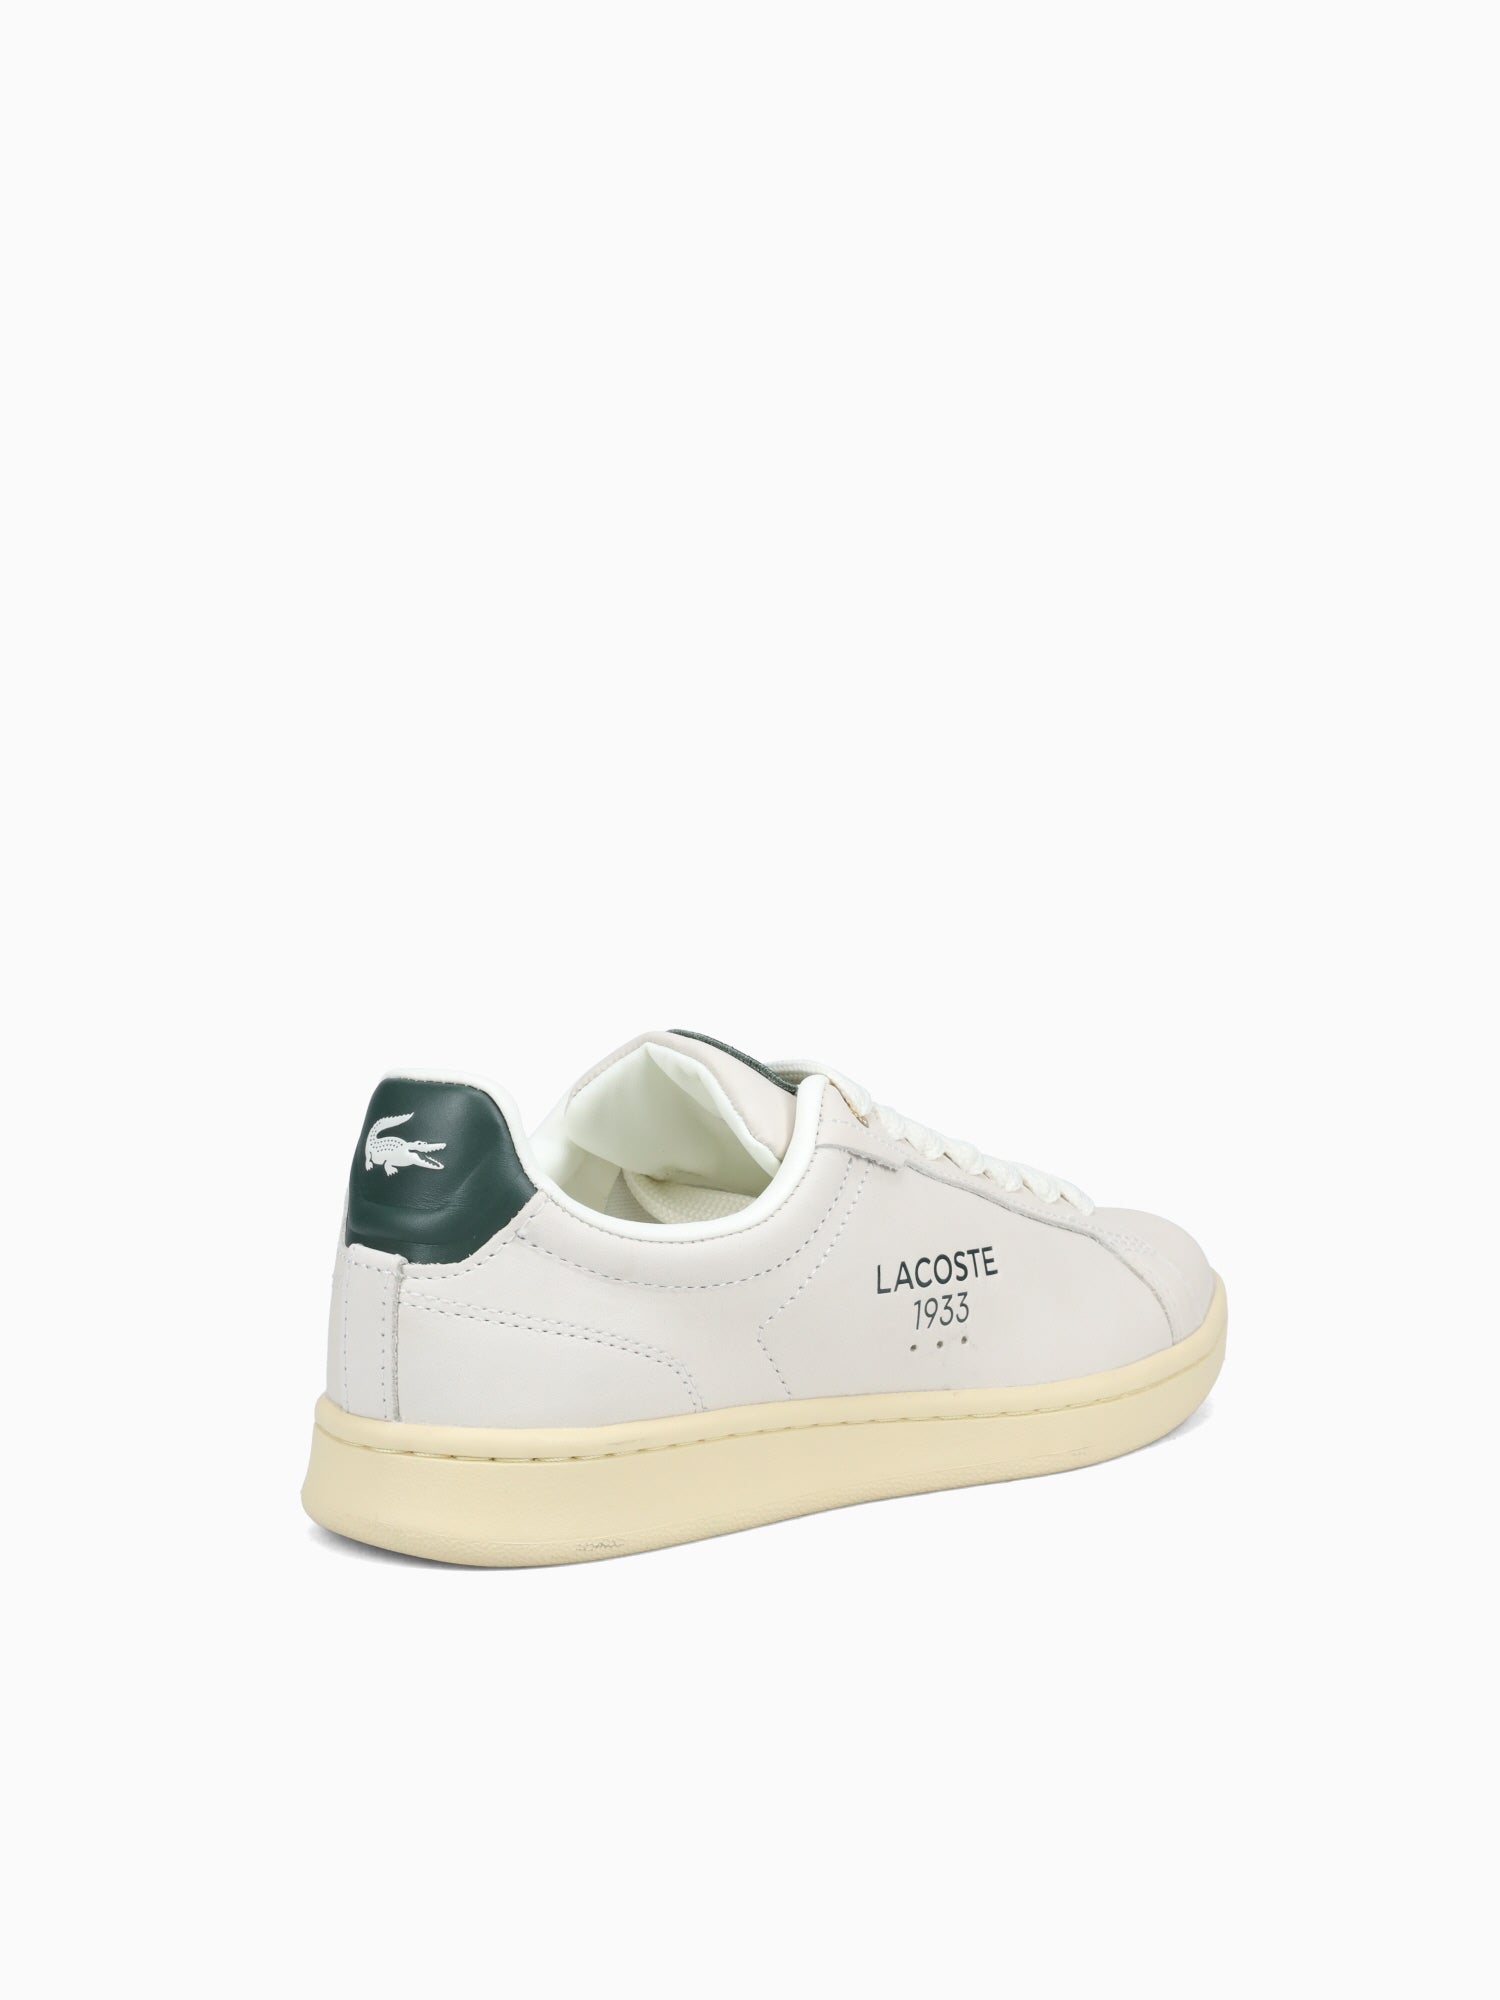 Carnaby Pro 2233 Offwht Ltylw leather– Novus Shoes